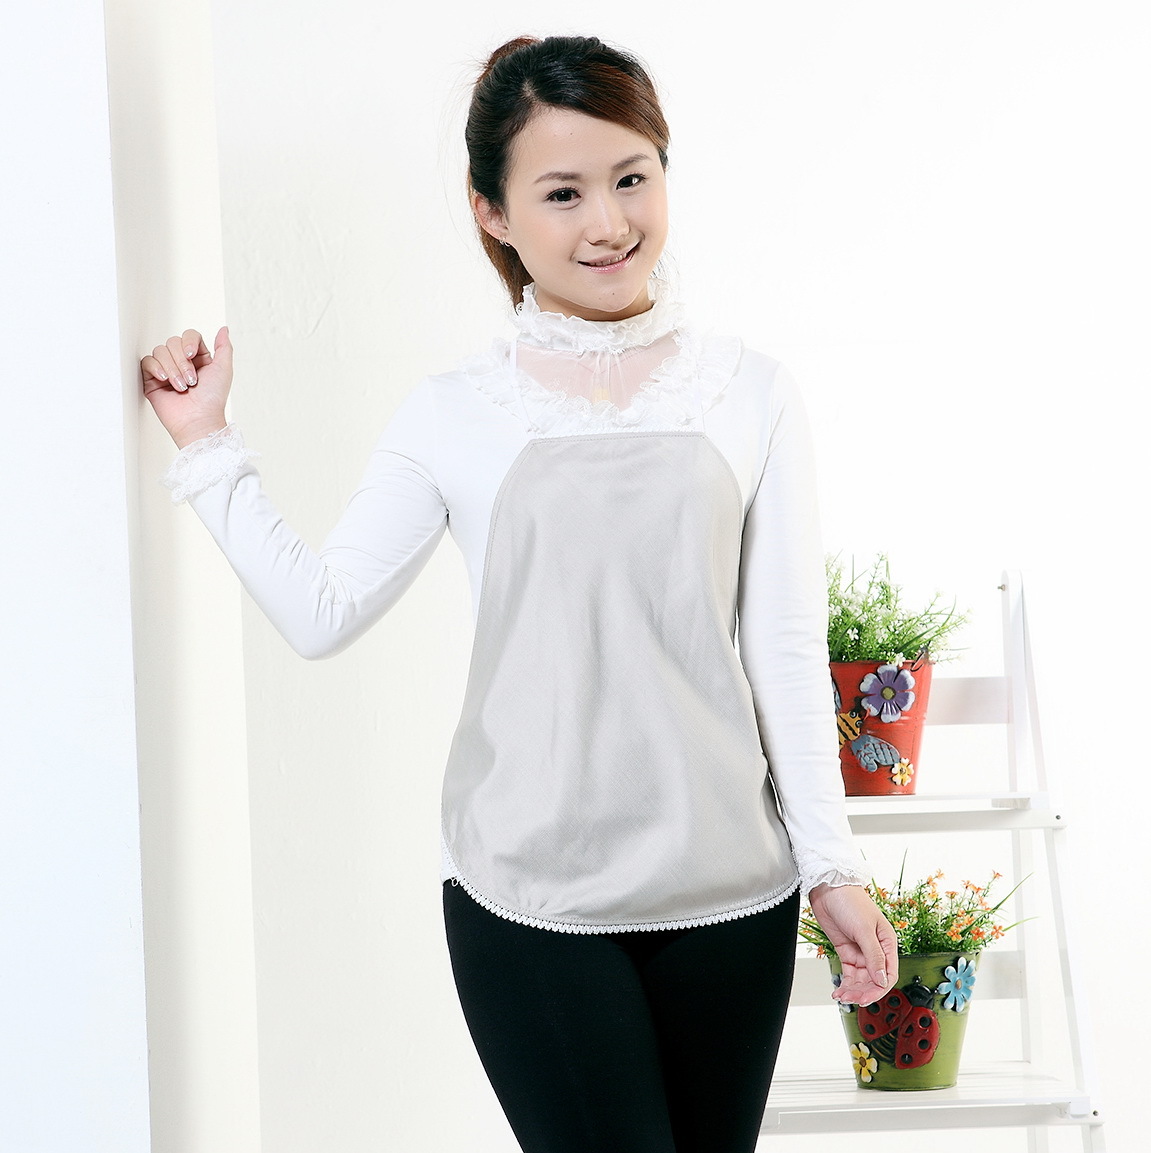 Mbaby radiation-resistant maternity clothing silver fiber maternity radiation-resistant bellyached m8106